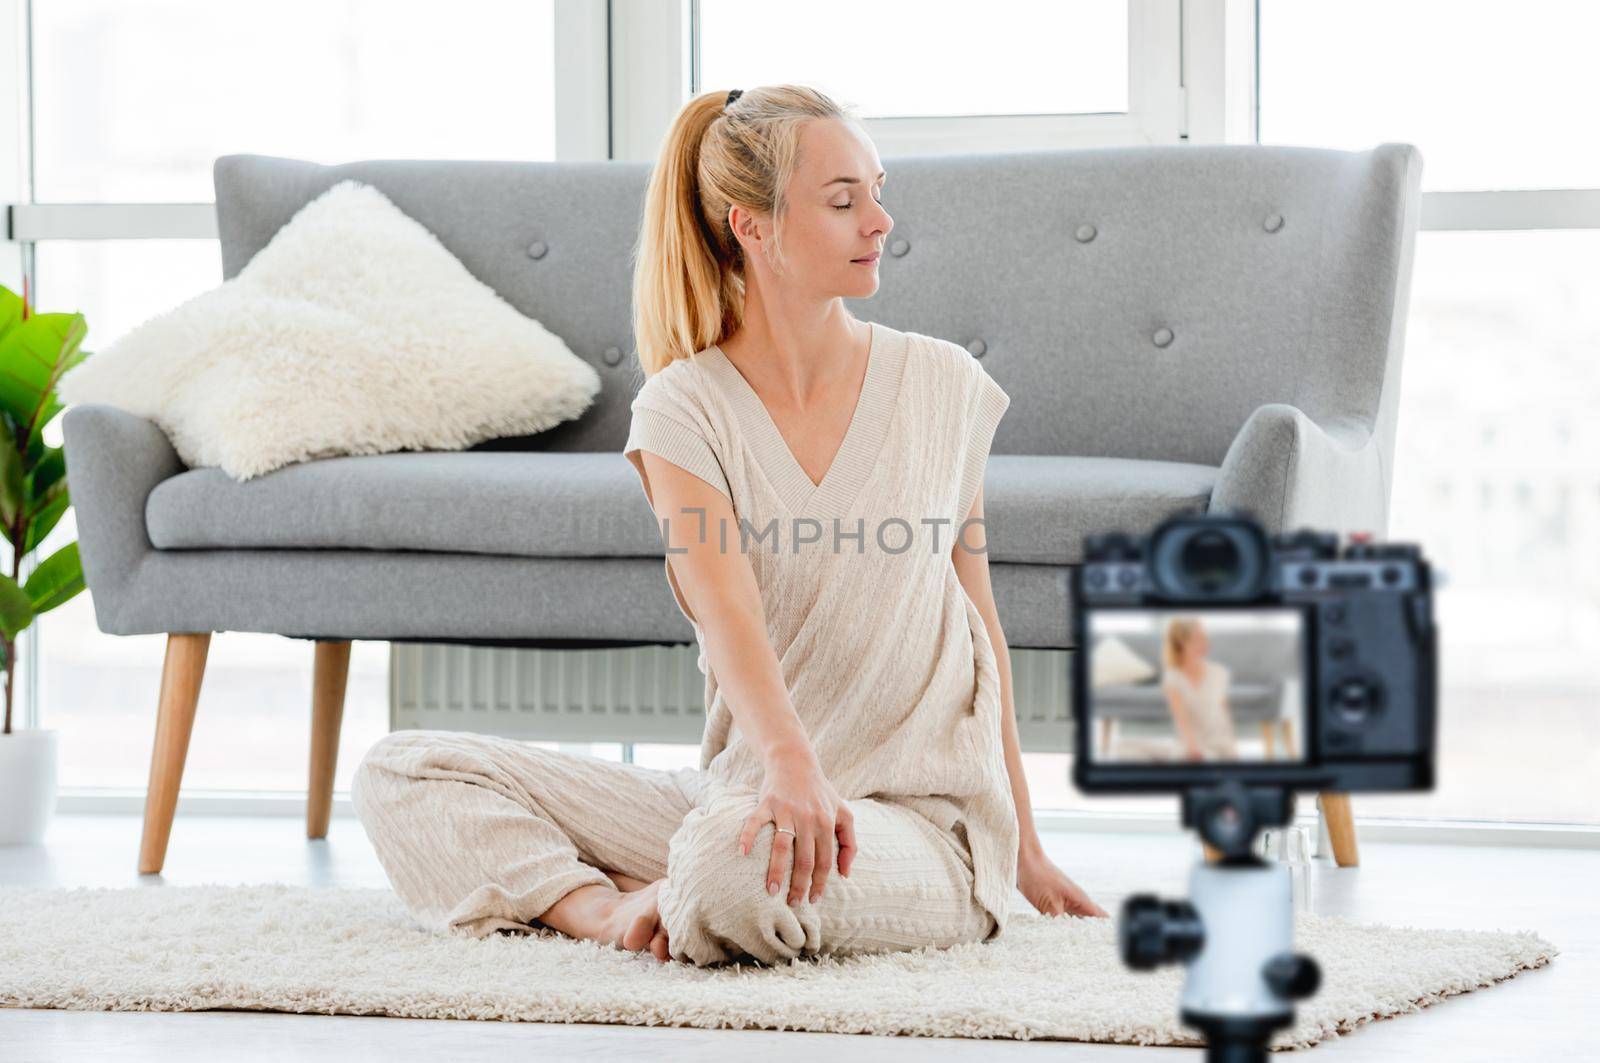 Blond girl turned to the side and stretch her back during morning yoga workout at home. Blogger profession. Shooting with a camera for a blog